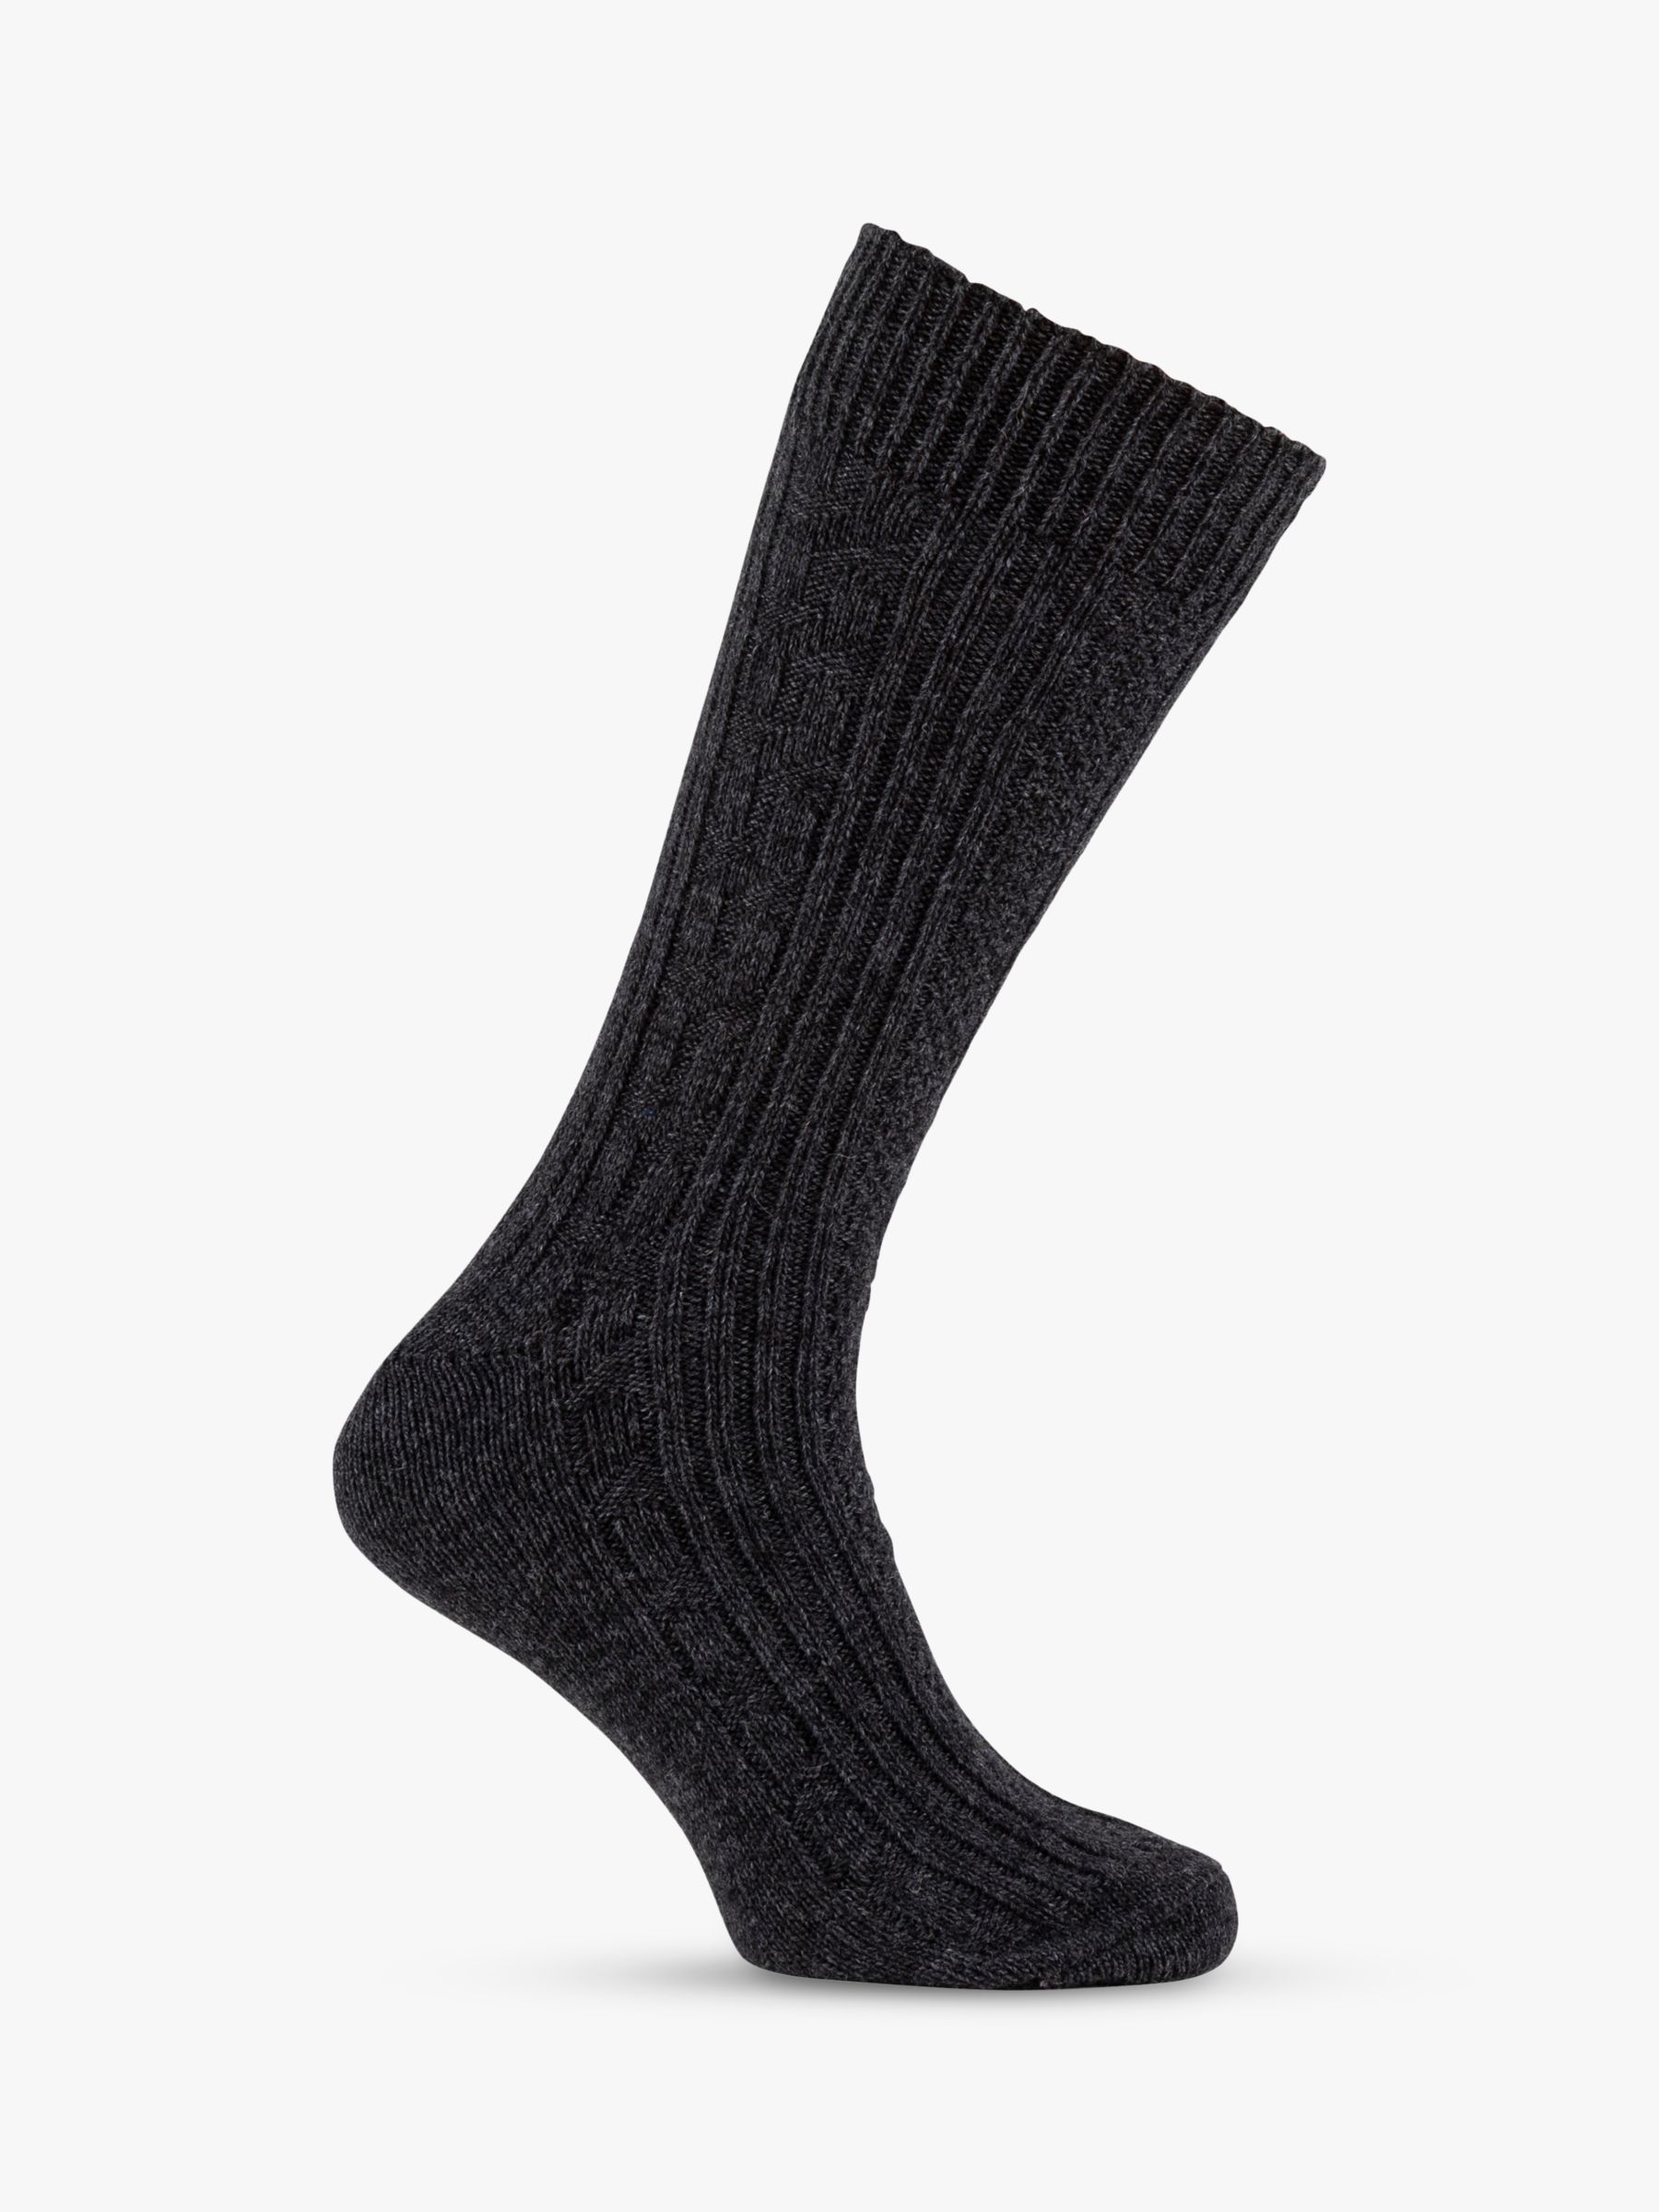 Buy totes Cable Knit Socks, Pack of 2, Burgundy/Charcoal Online at johnlewis.com